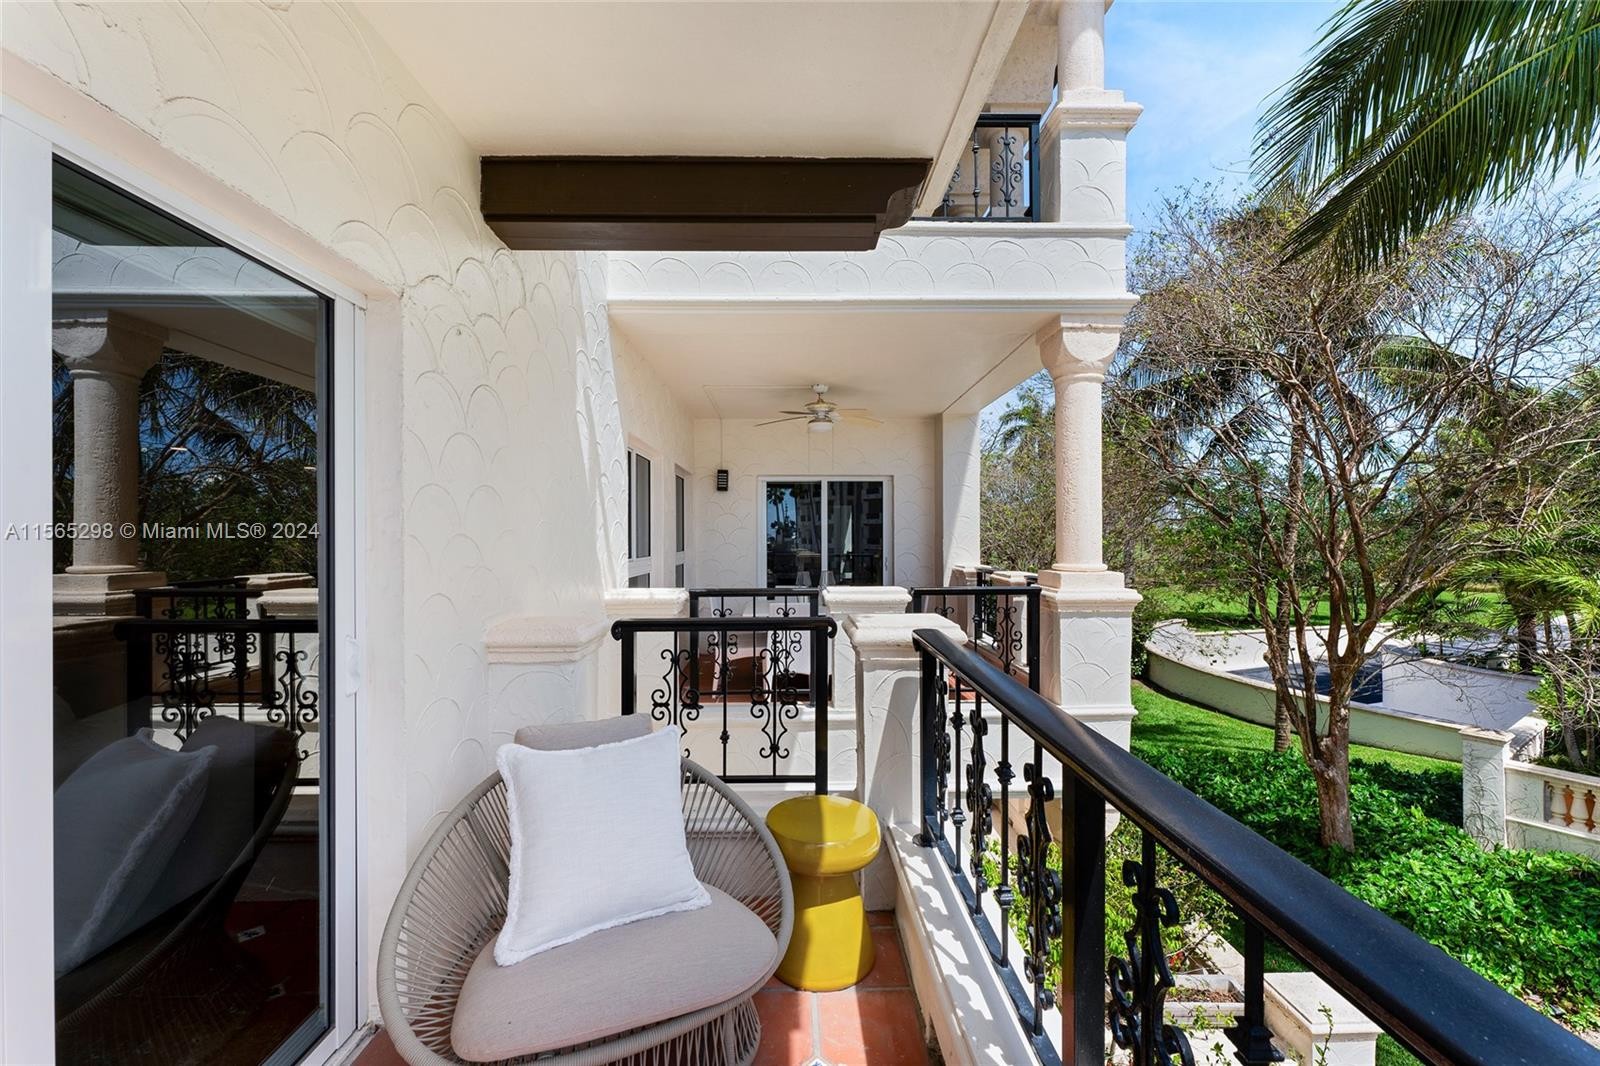 37. 2221 Fisher Island Dr